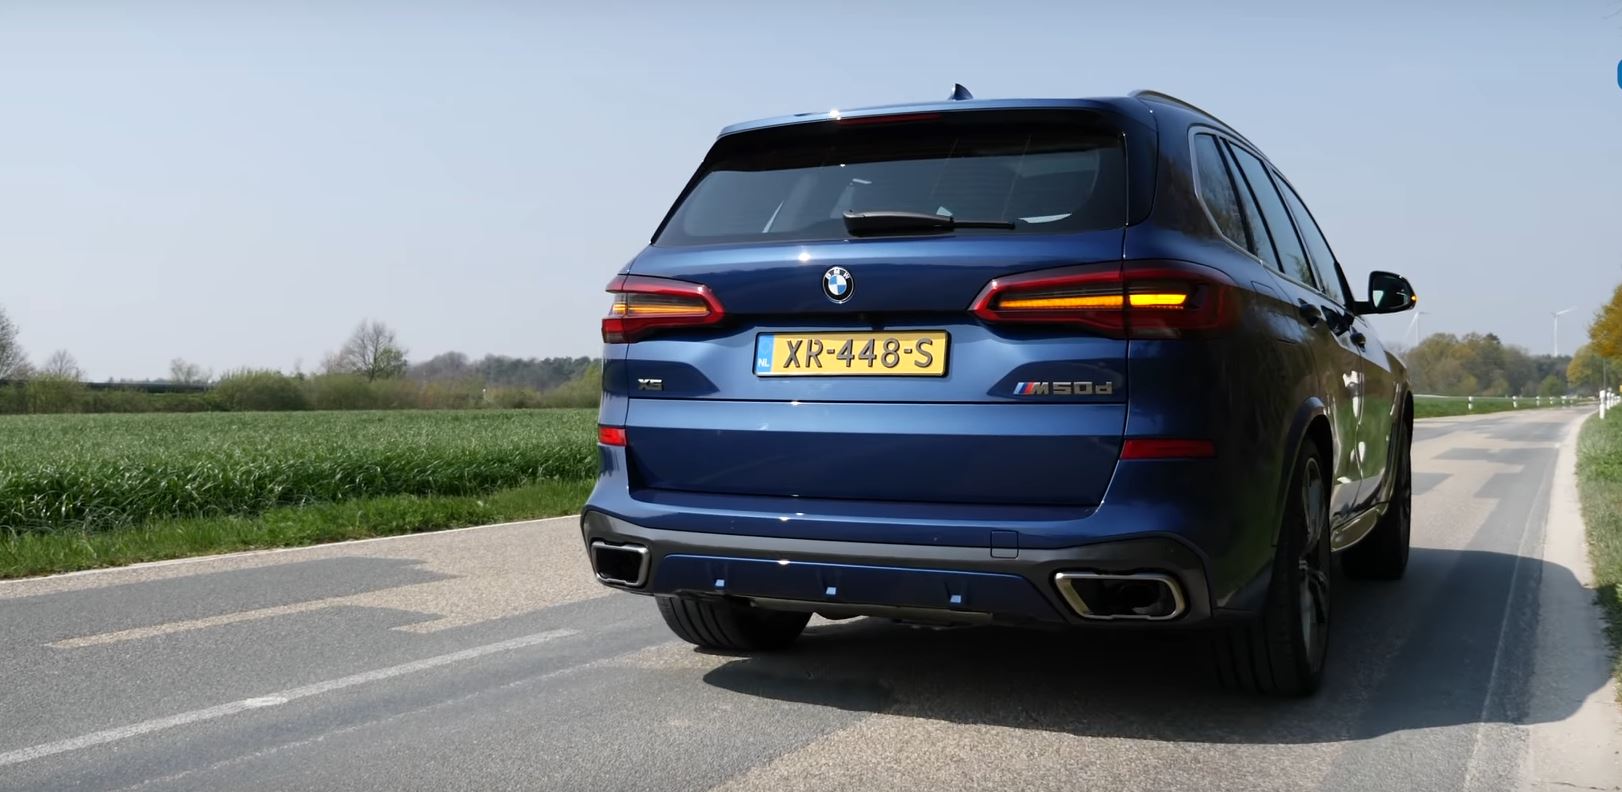 NEW ) BMW X5 e70 Tuning, Low, Exhaust, Acceleration 